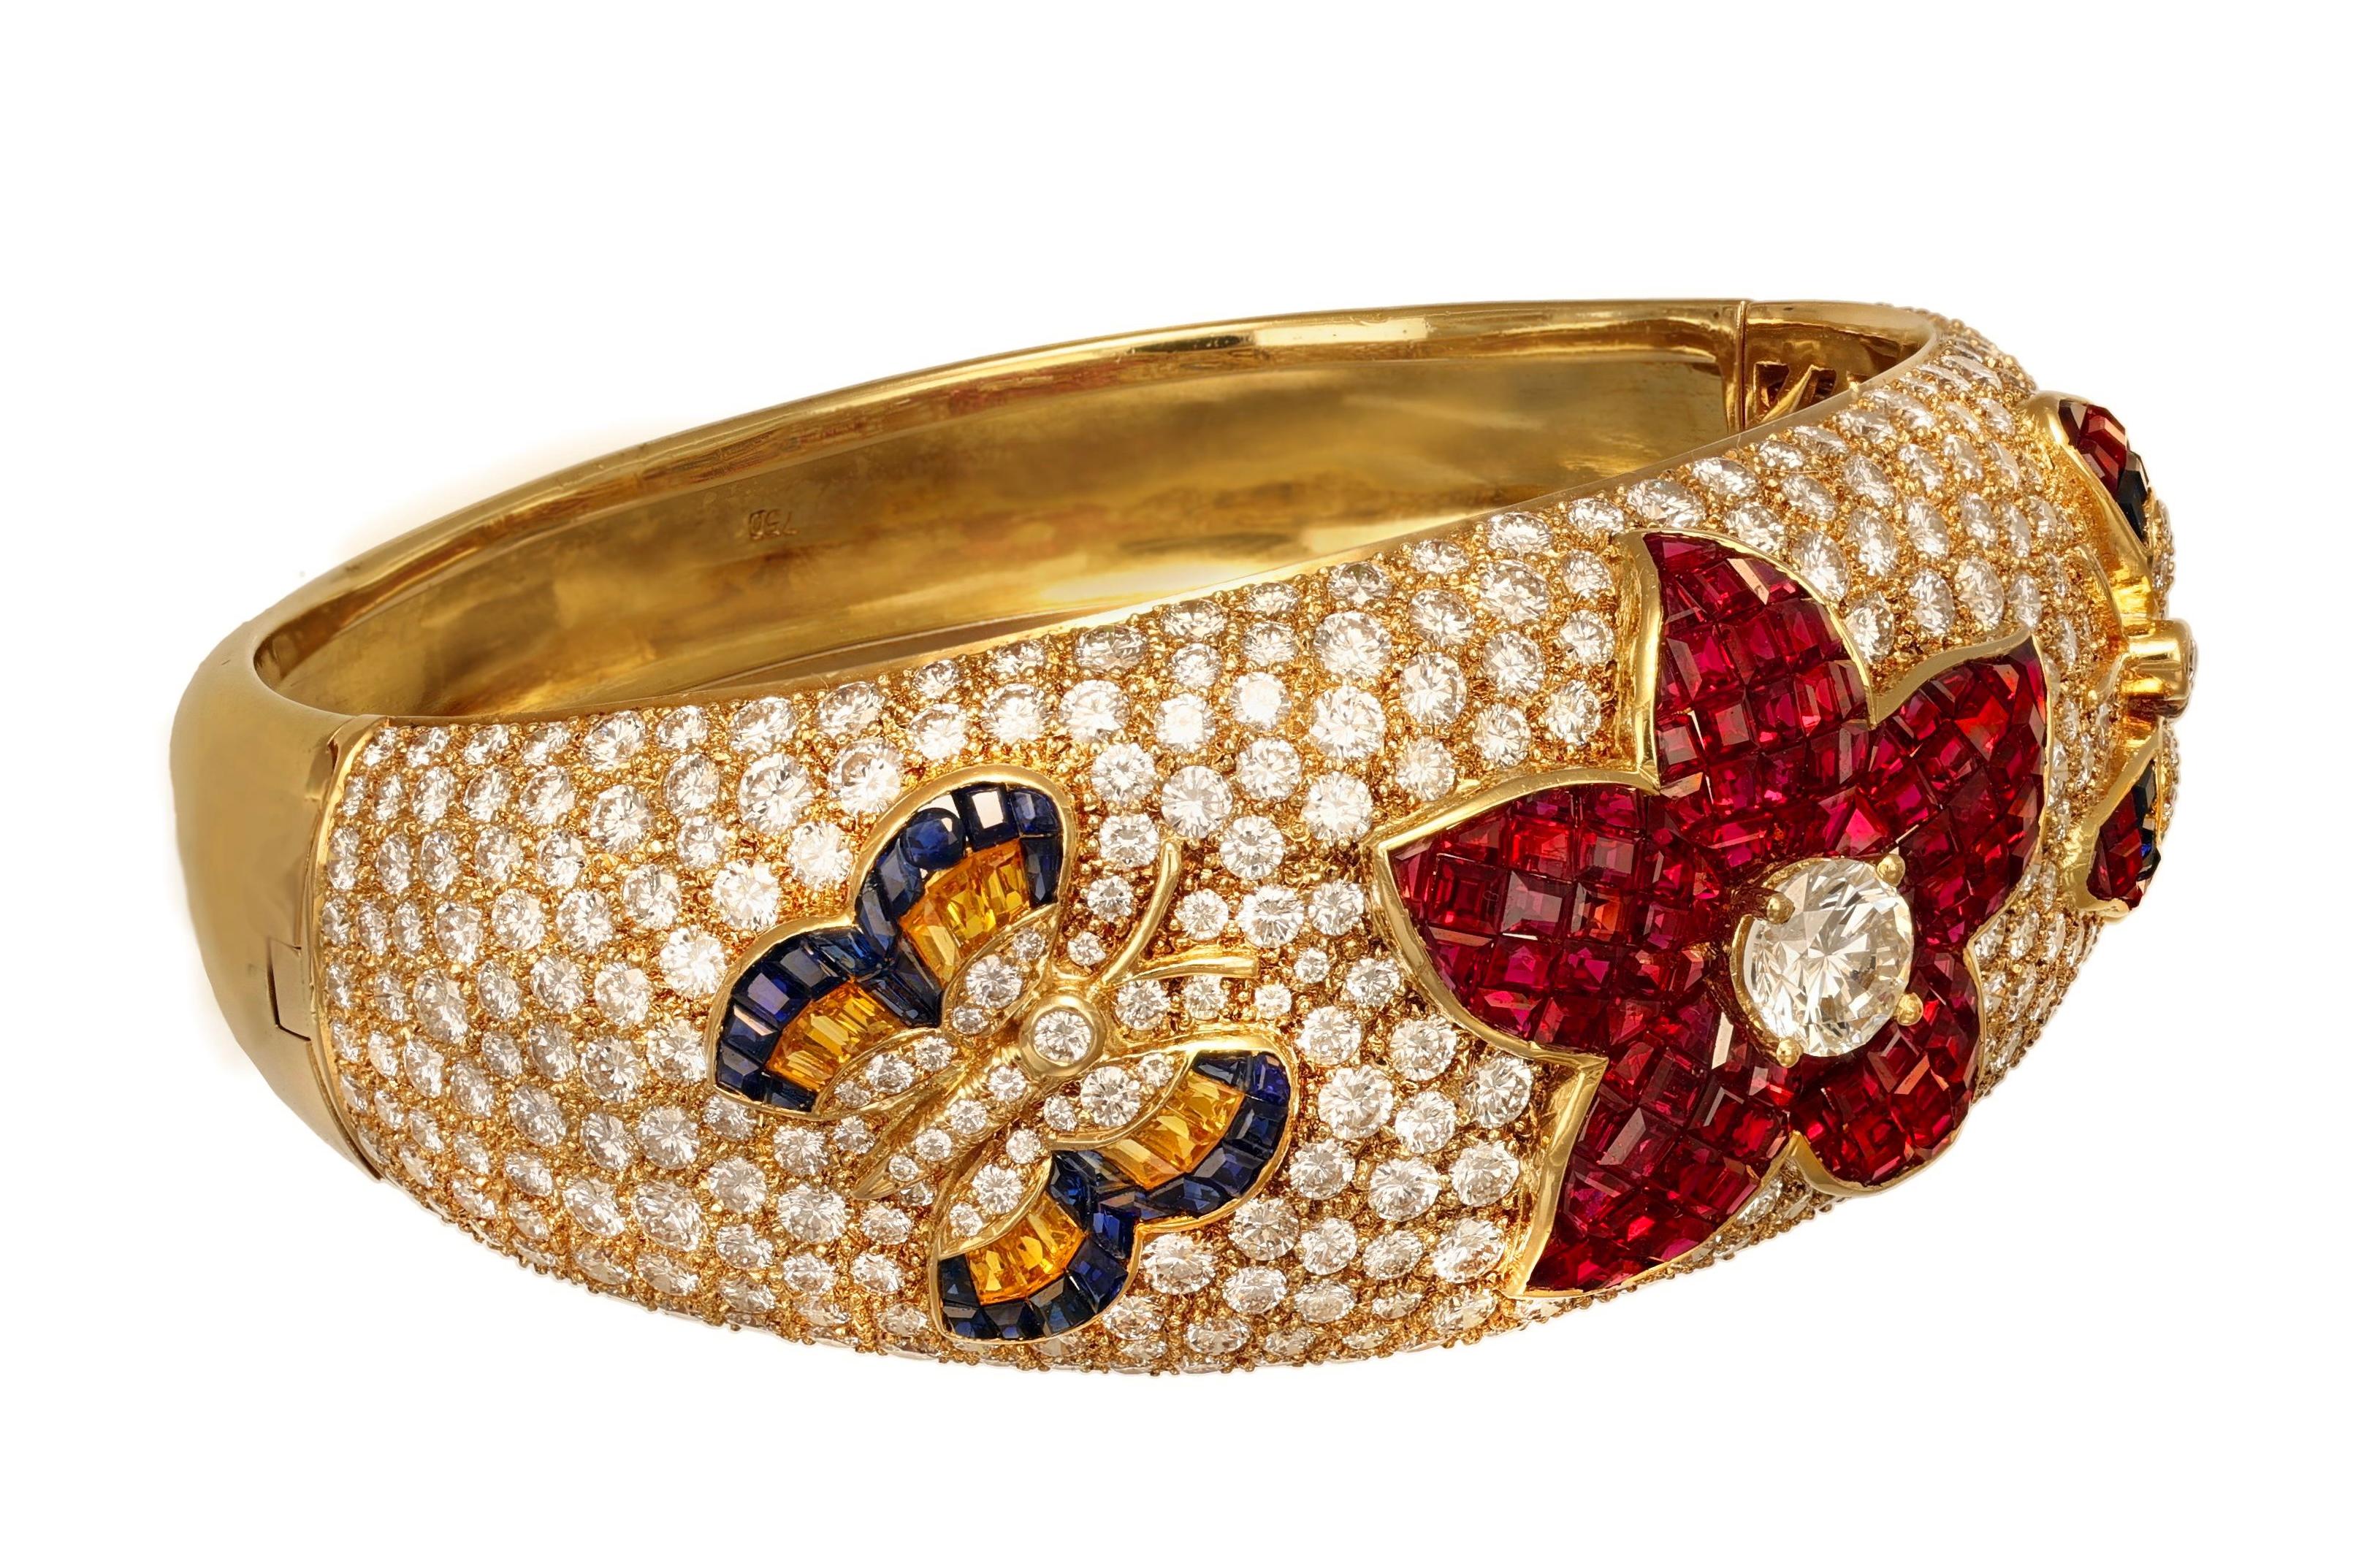 18 kt. Yellow Gold Wide Bangle Bracelet With Diamonds, Rubies, Sapphires For Sale 1